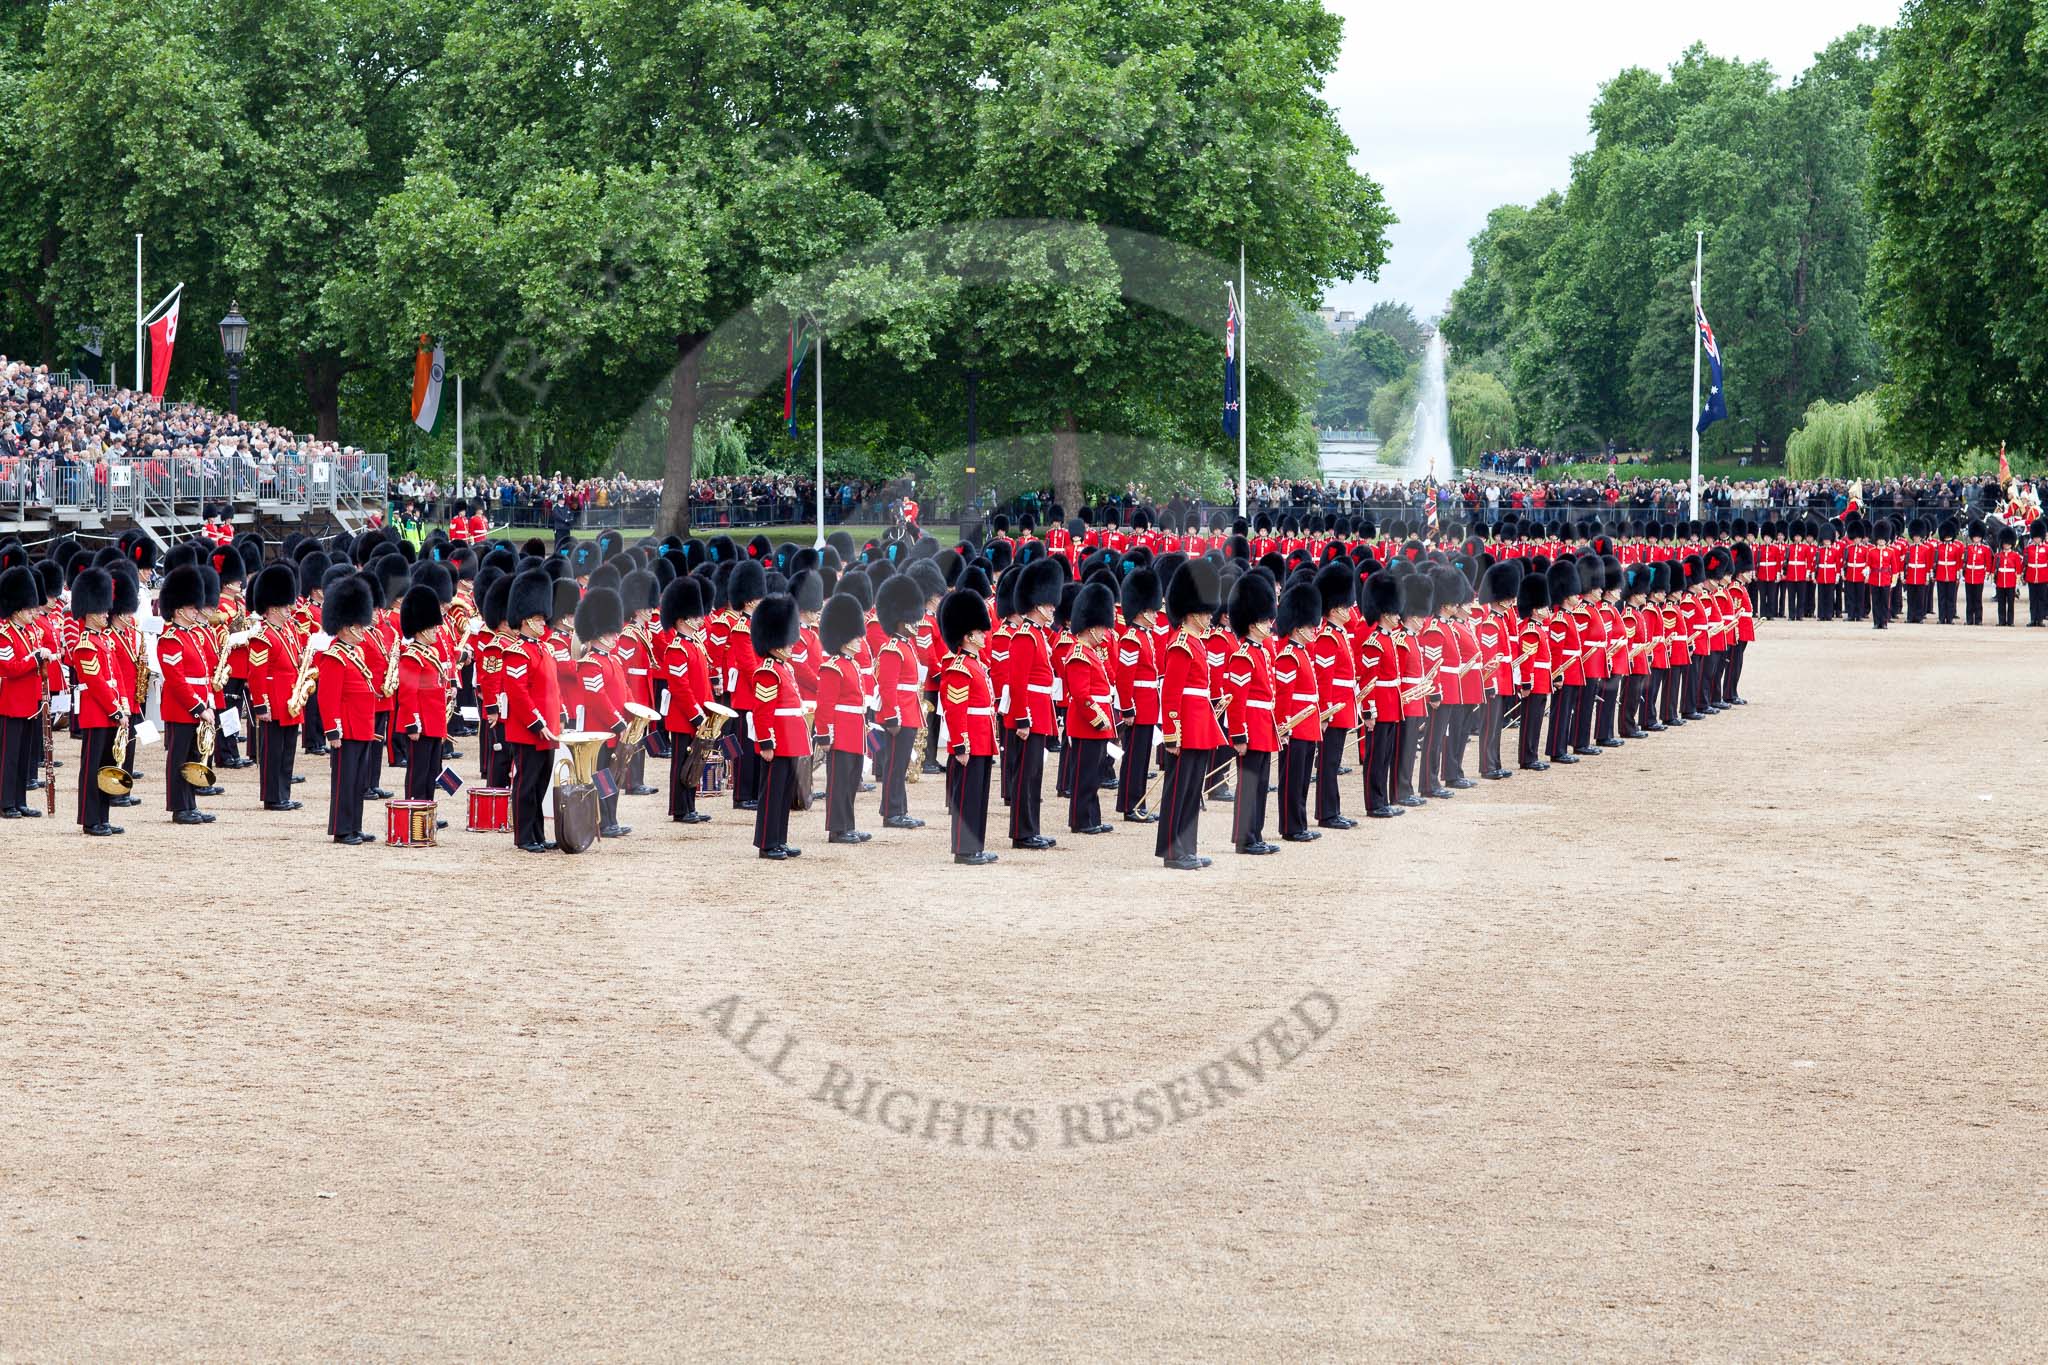 The Major General's Review 2011: The Massed Bands. Behind them, No. 1 and No. 2 Guard, in the background spectators watching from St. James's Park..
Horse Guards Parade, Westminster,
London SW1,
Greater London,
United Kingdom,
on 28 May 2011 at 11:53, image #235